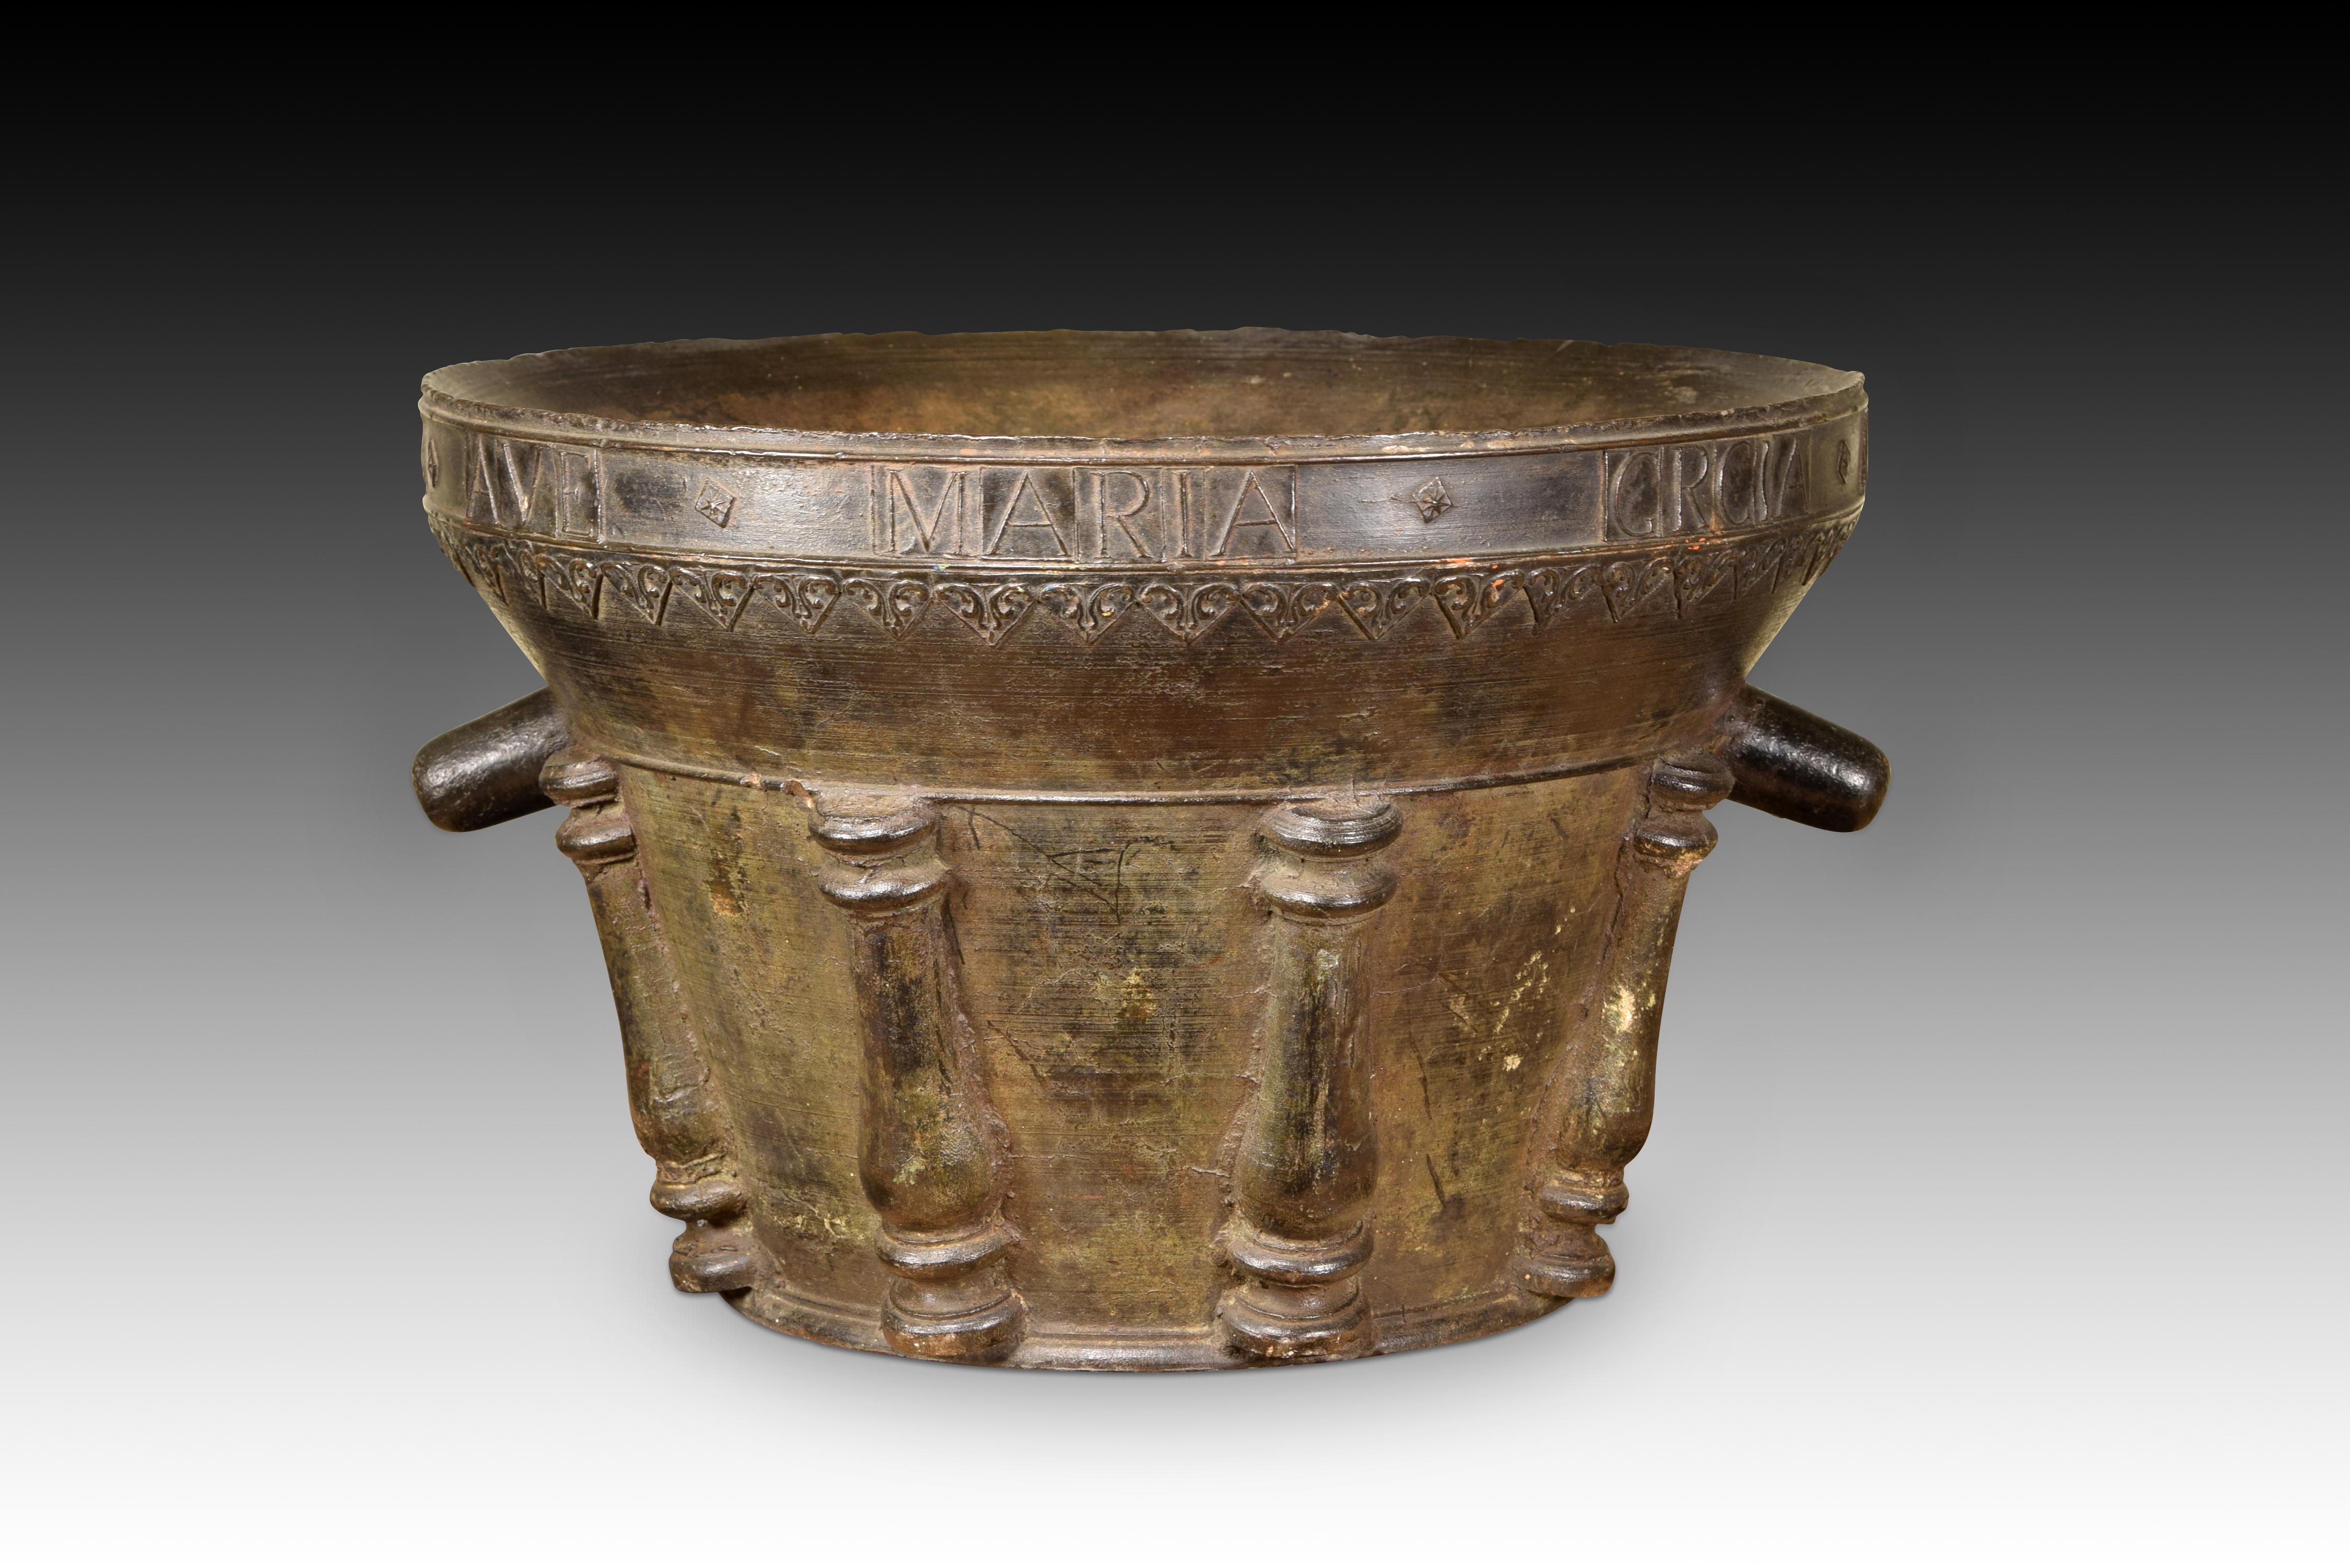 Pharmacy mortar. Bronze. Spain, dated in the piece in 1743.  5